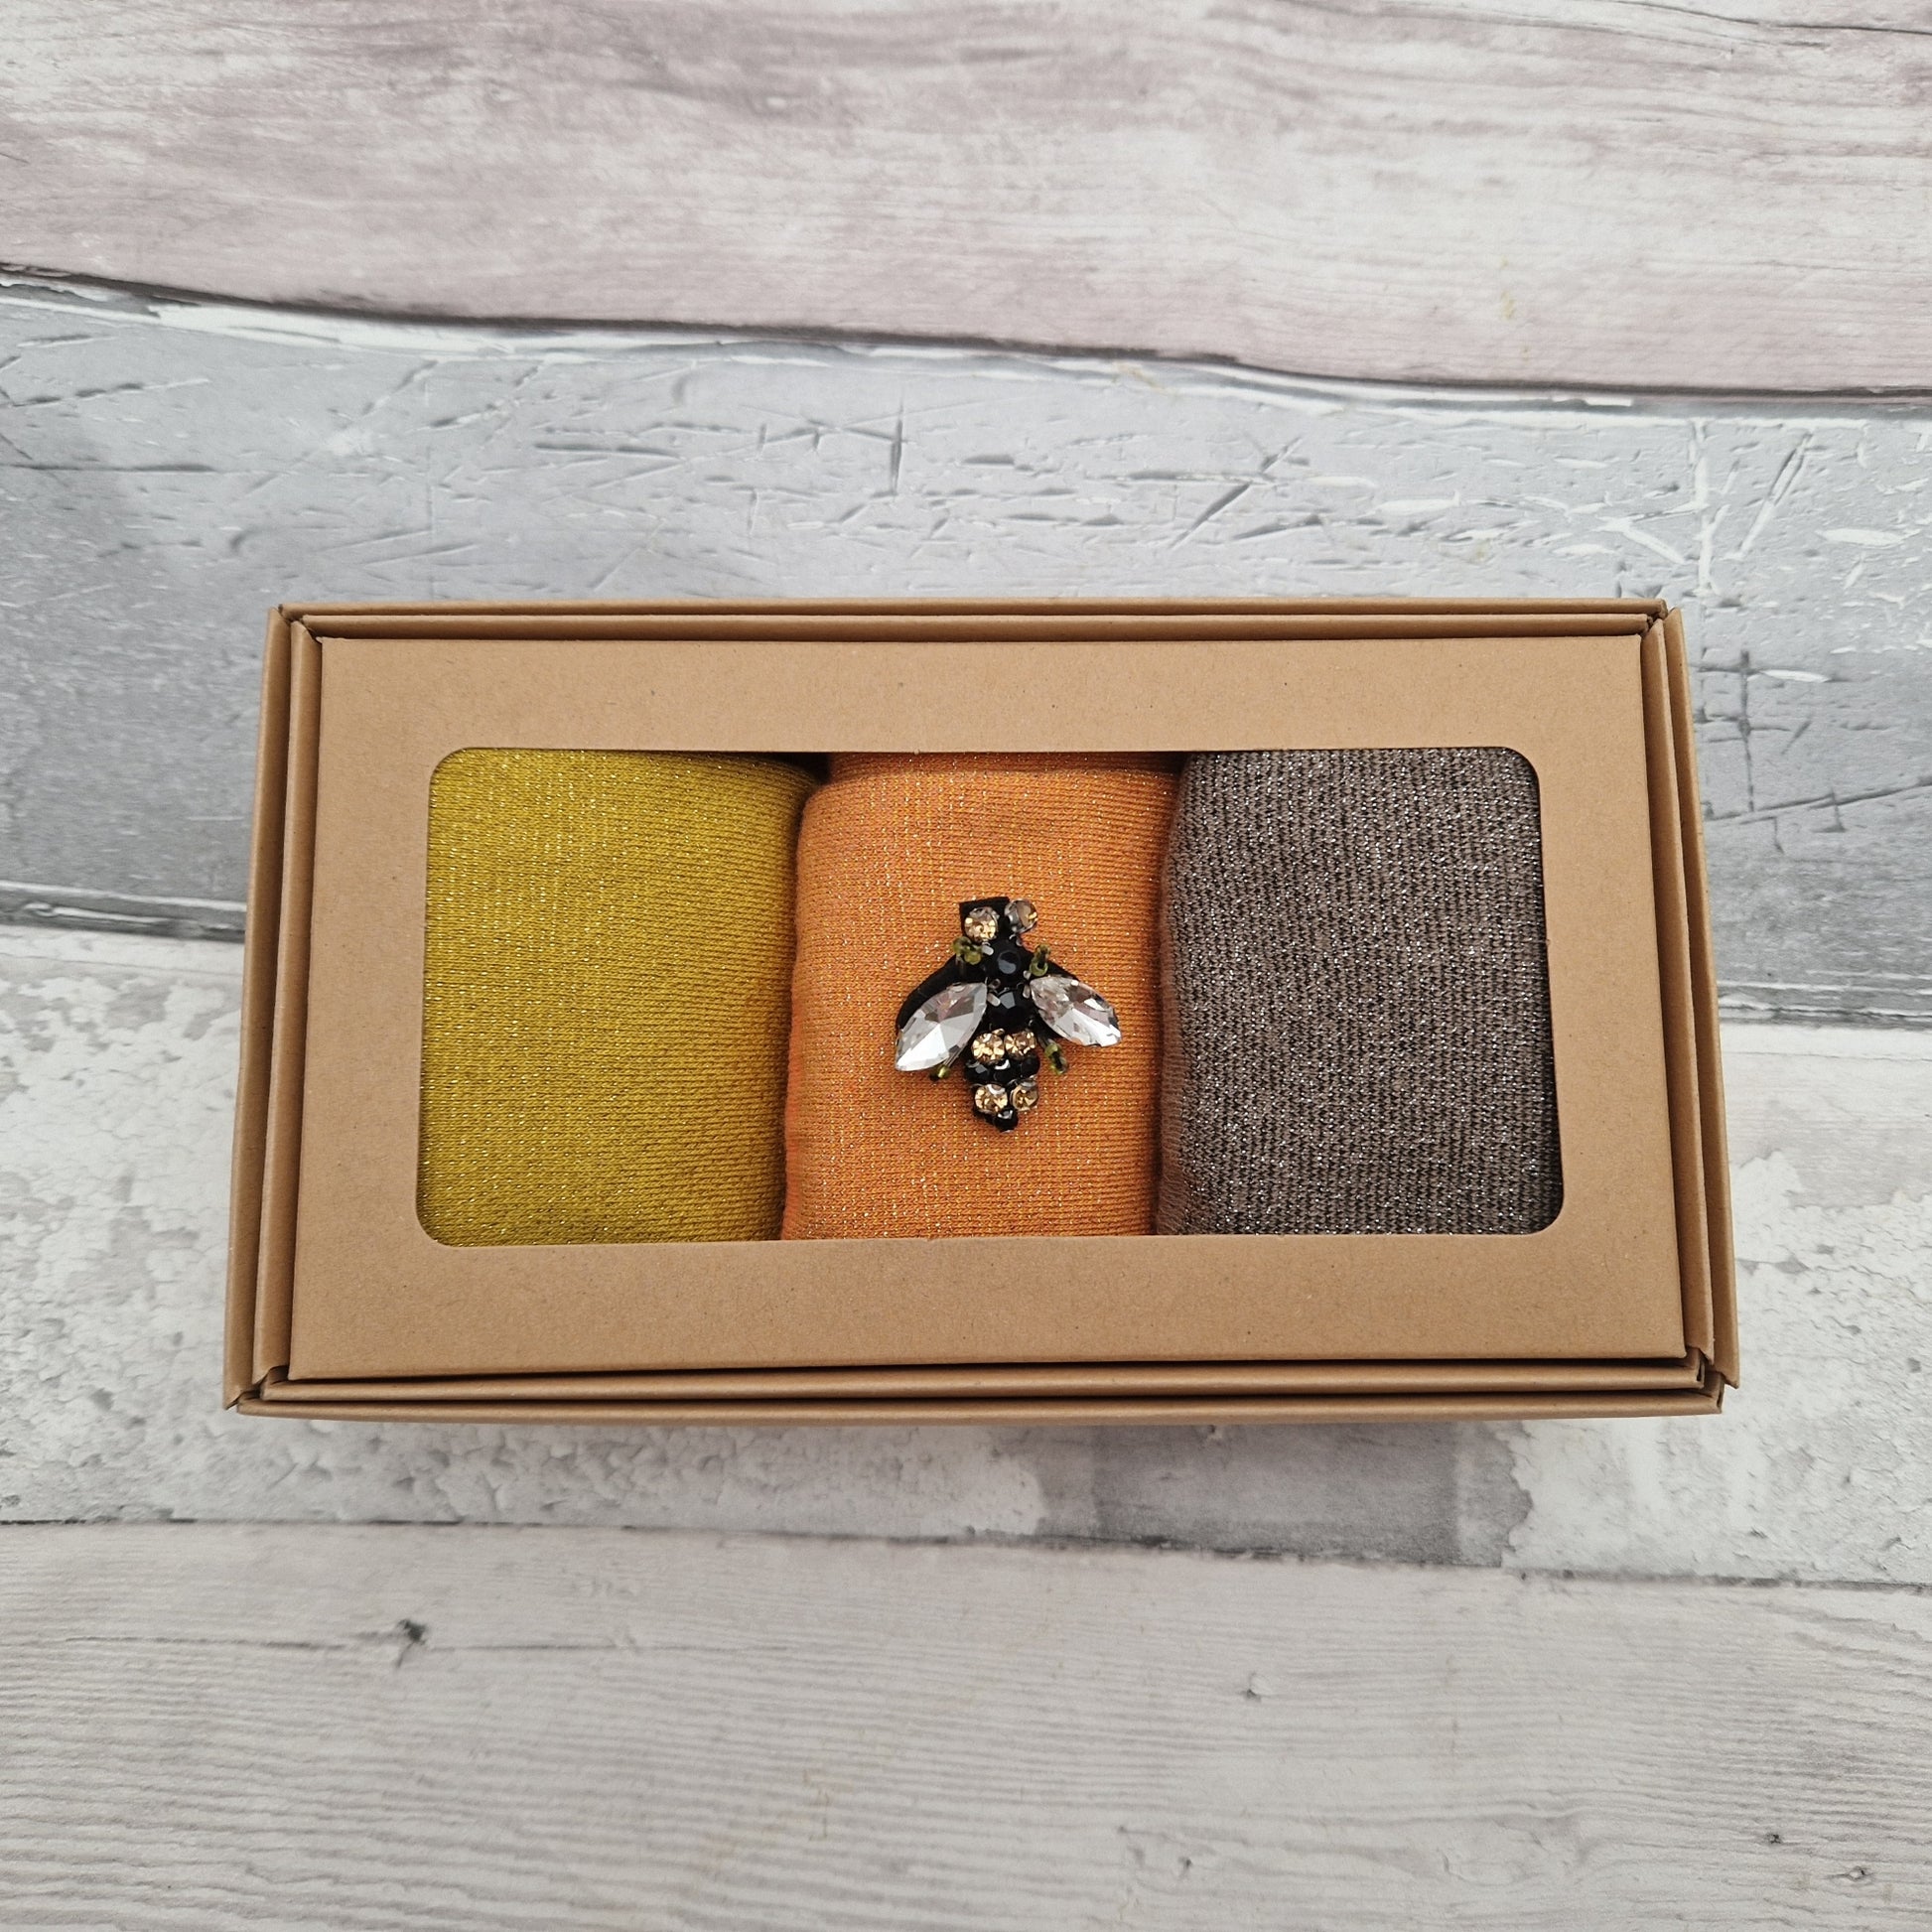 Set of 3 gift boxed sparkly socks in gold, cantaloupe and pewter. Complete with a glass bee brooch.